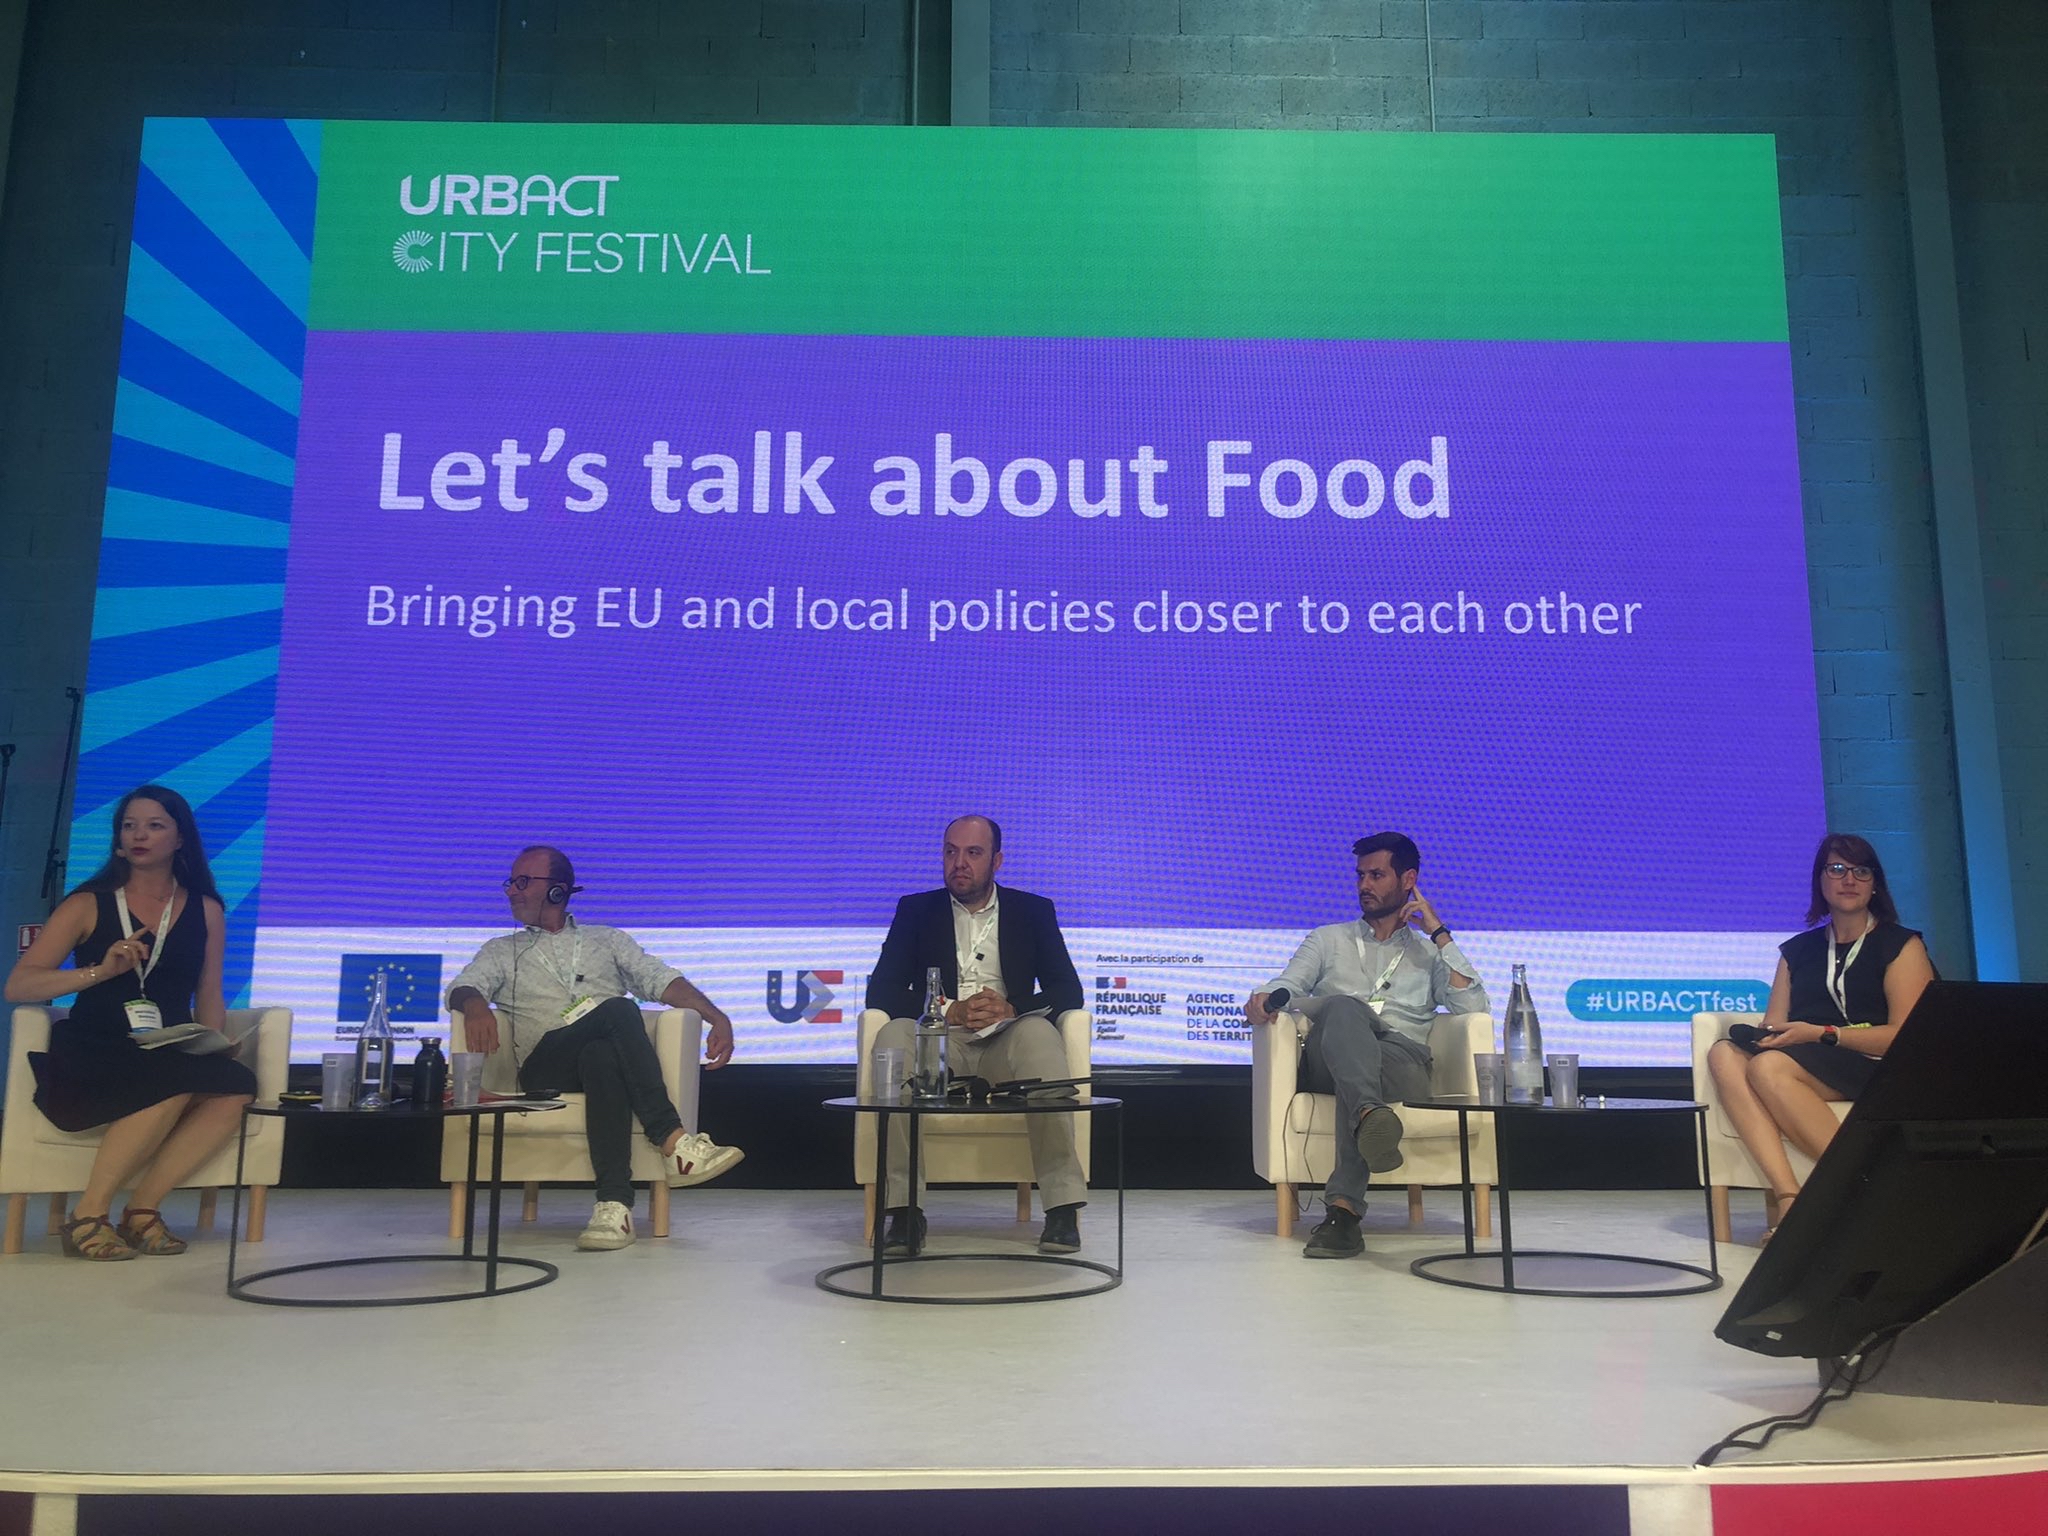 Let's talk about food 2022 URBACT City Festival session